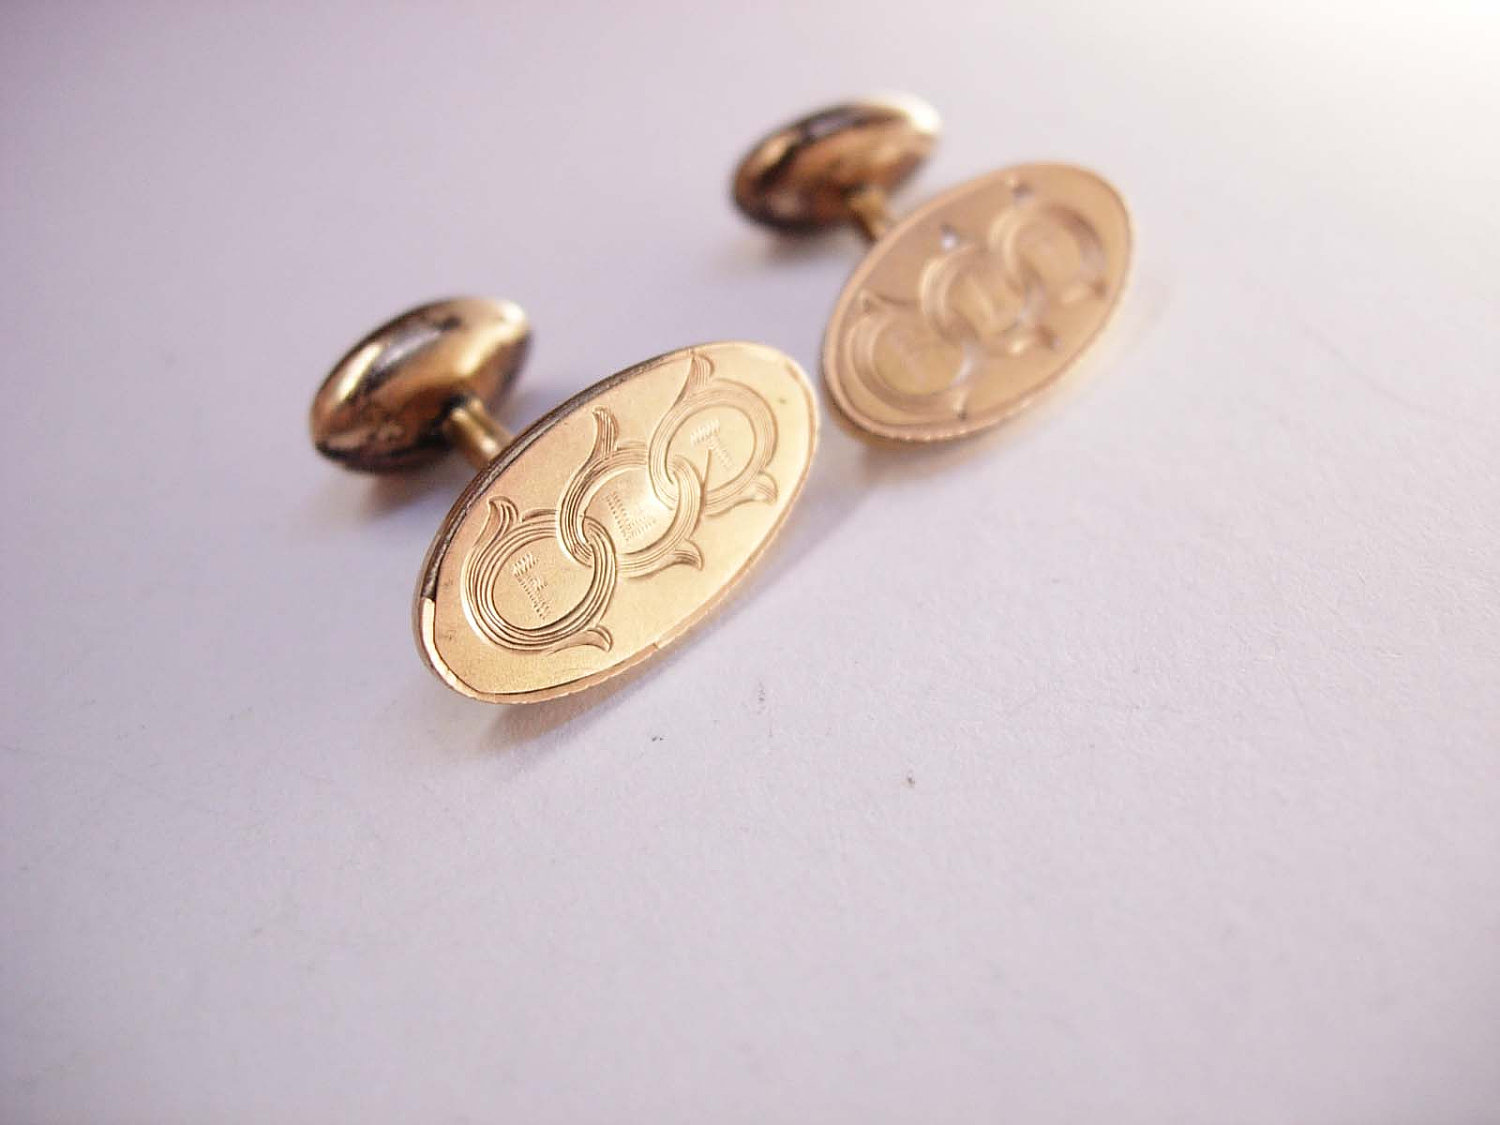 VintageSparkles******: The BEST place to buy vintage cufflinks for your ...